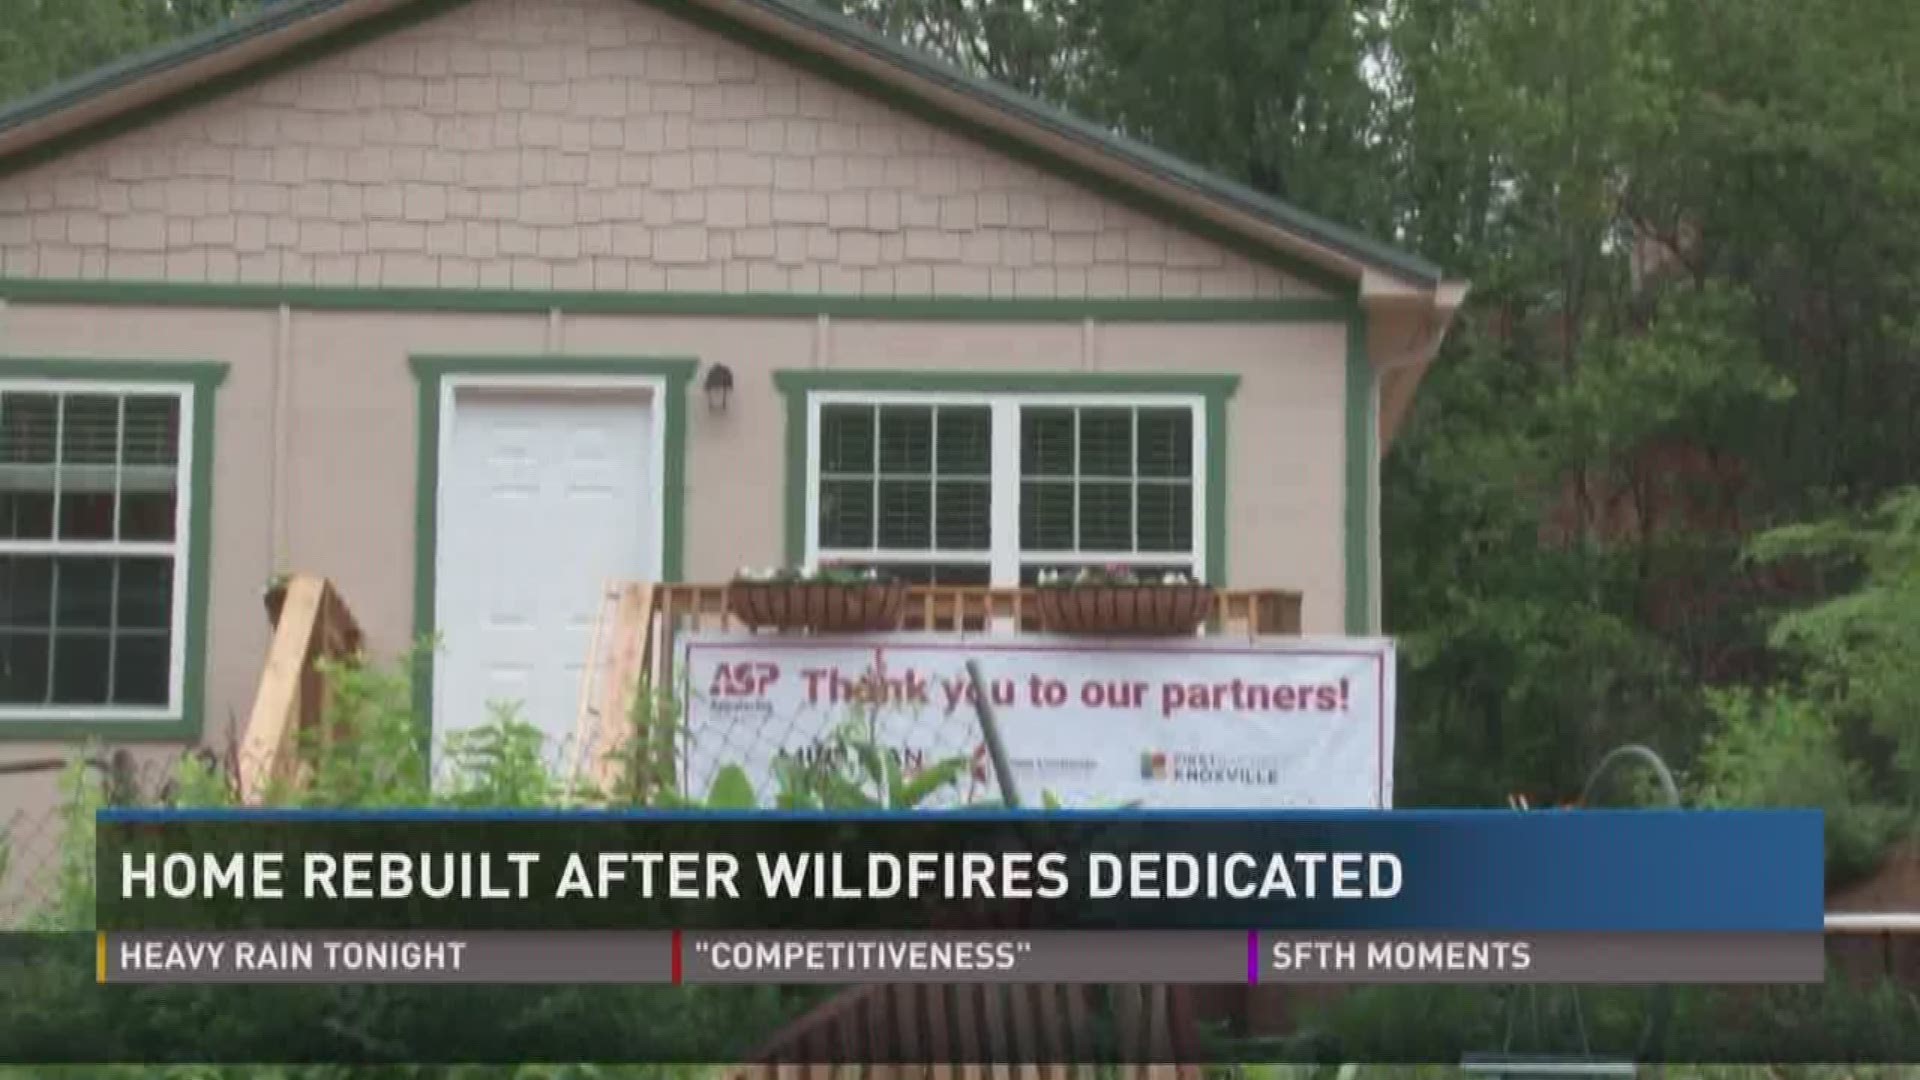 Exactly 8 months since the November wildfires, the first home built by Appalachia Service Project and the Mountain Tough Recovery Team is complete. Glenna Ogle is anxious to make new memories in her new home.